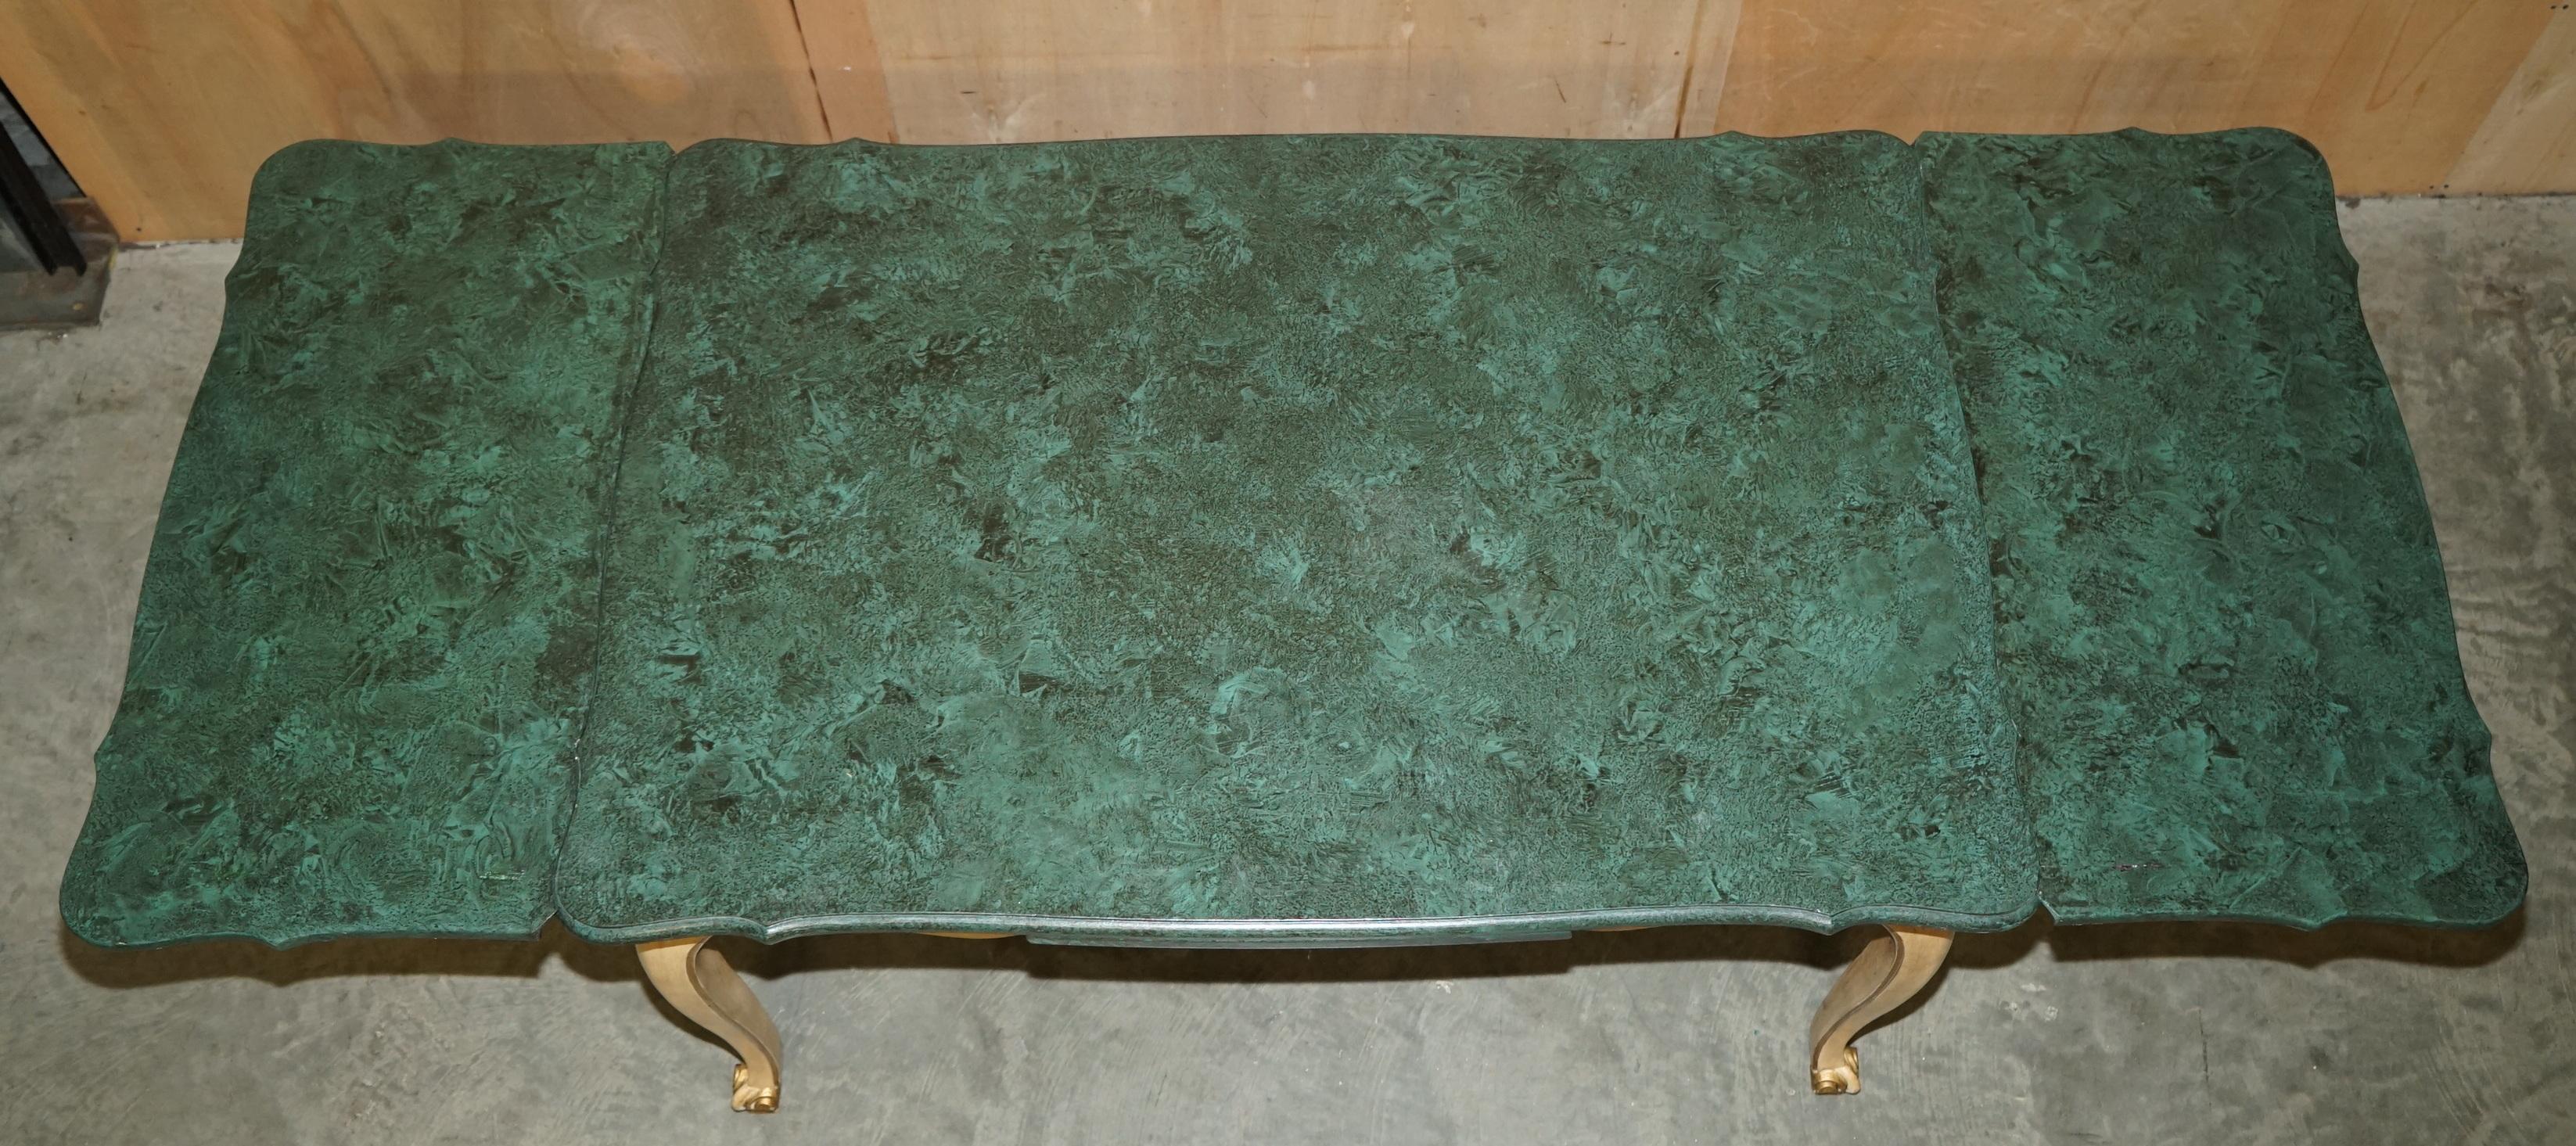 SUBLIME ANTIQUE FRENCH 1870 EXTENDING DiNING TABLE FAUX PAINTED MALACHITE TOP For Sale 9